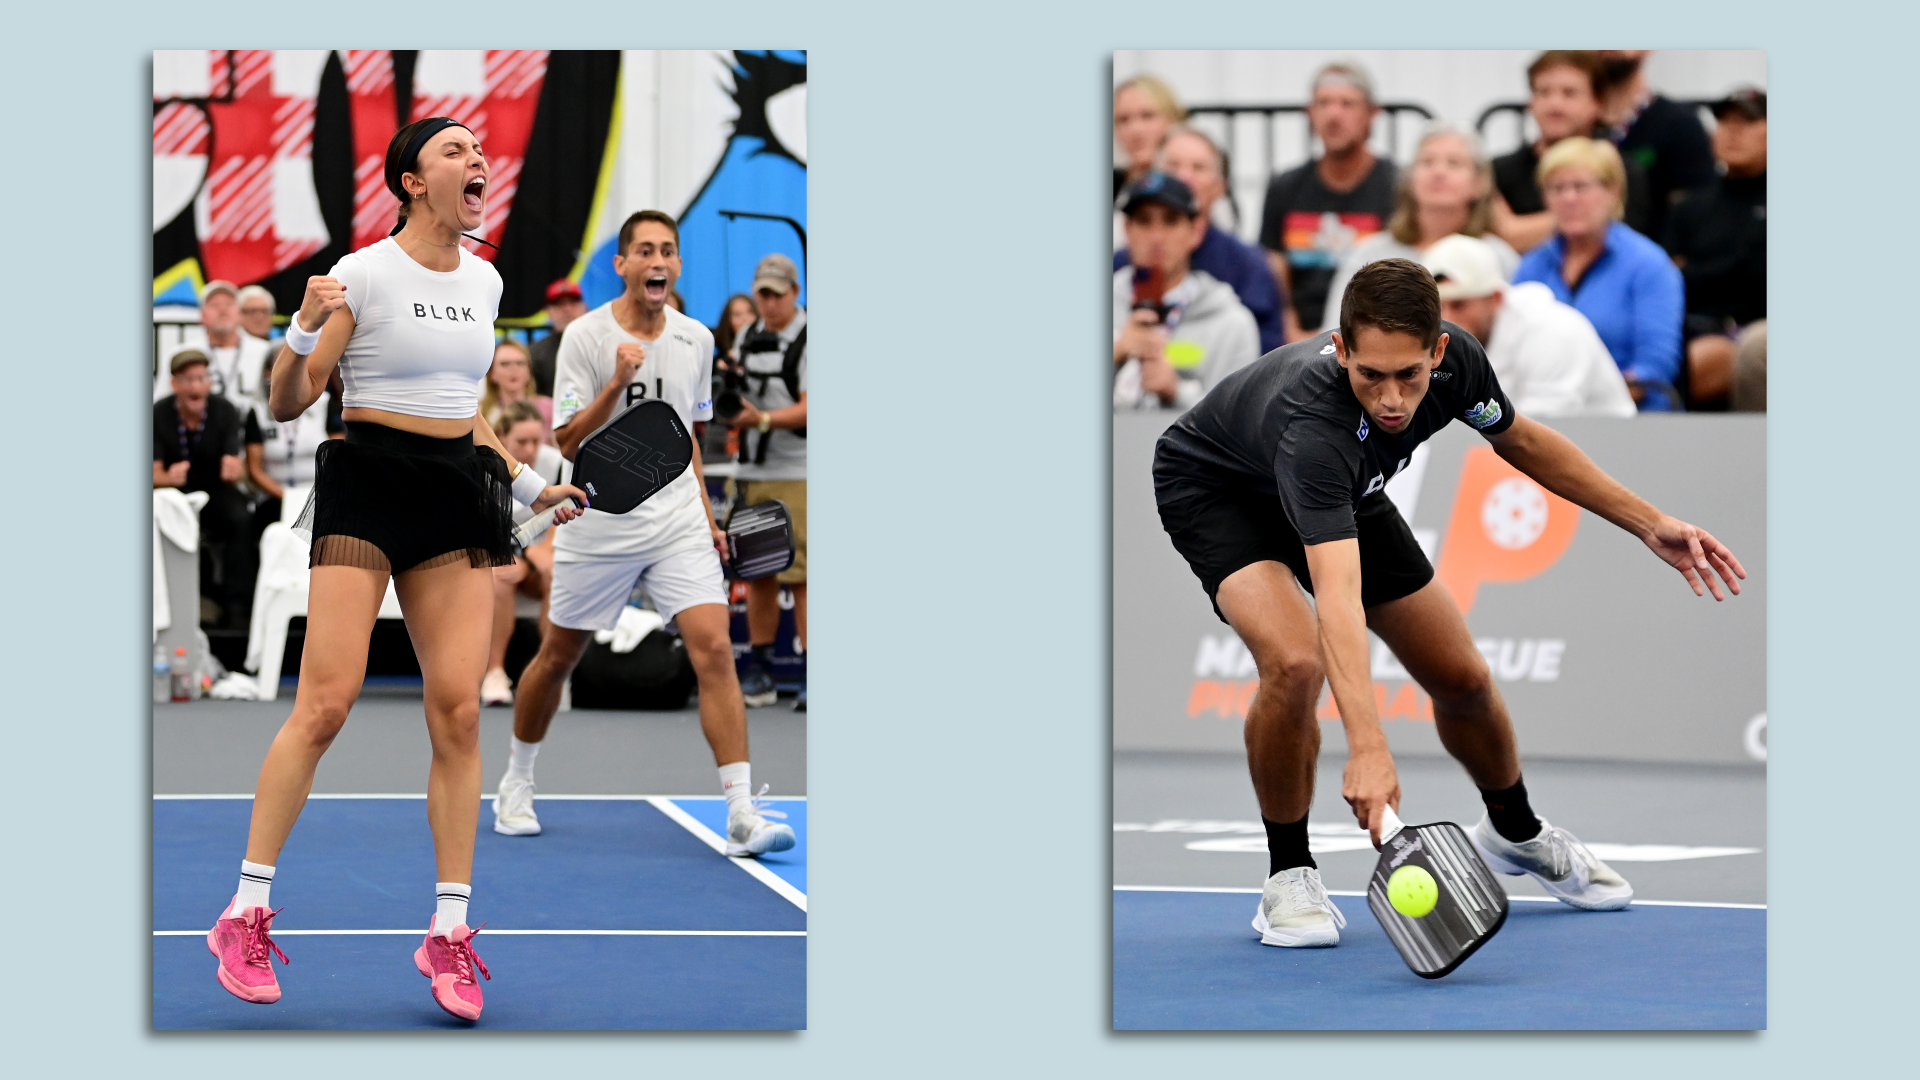 Two photos of a pickleball championship: On left, players celebrate winning a point, on right, a player reaches down with a paddle to hit the pickleball.